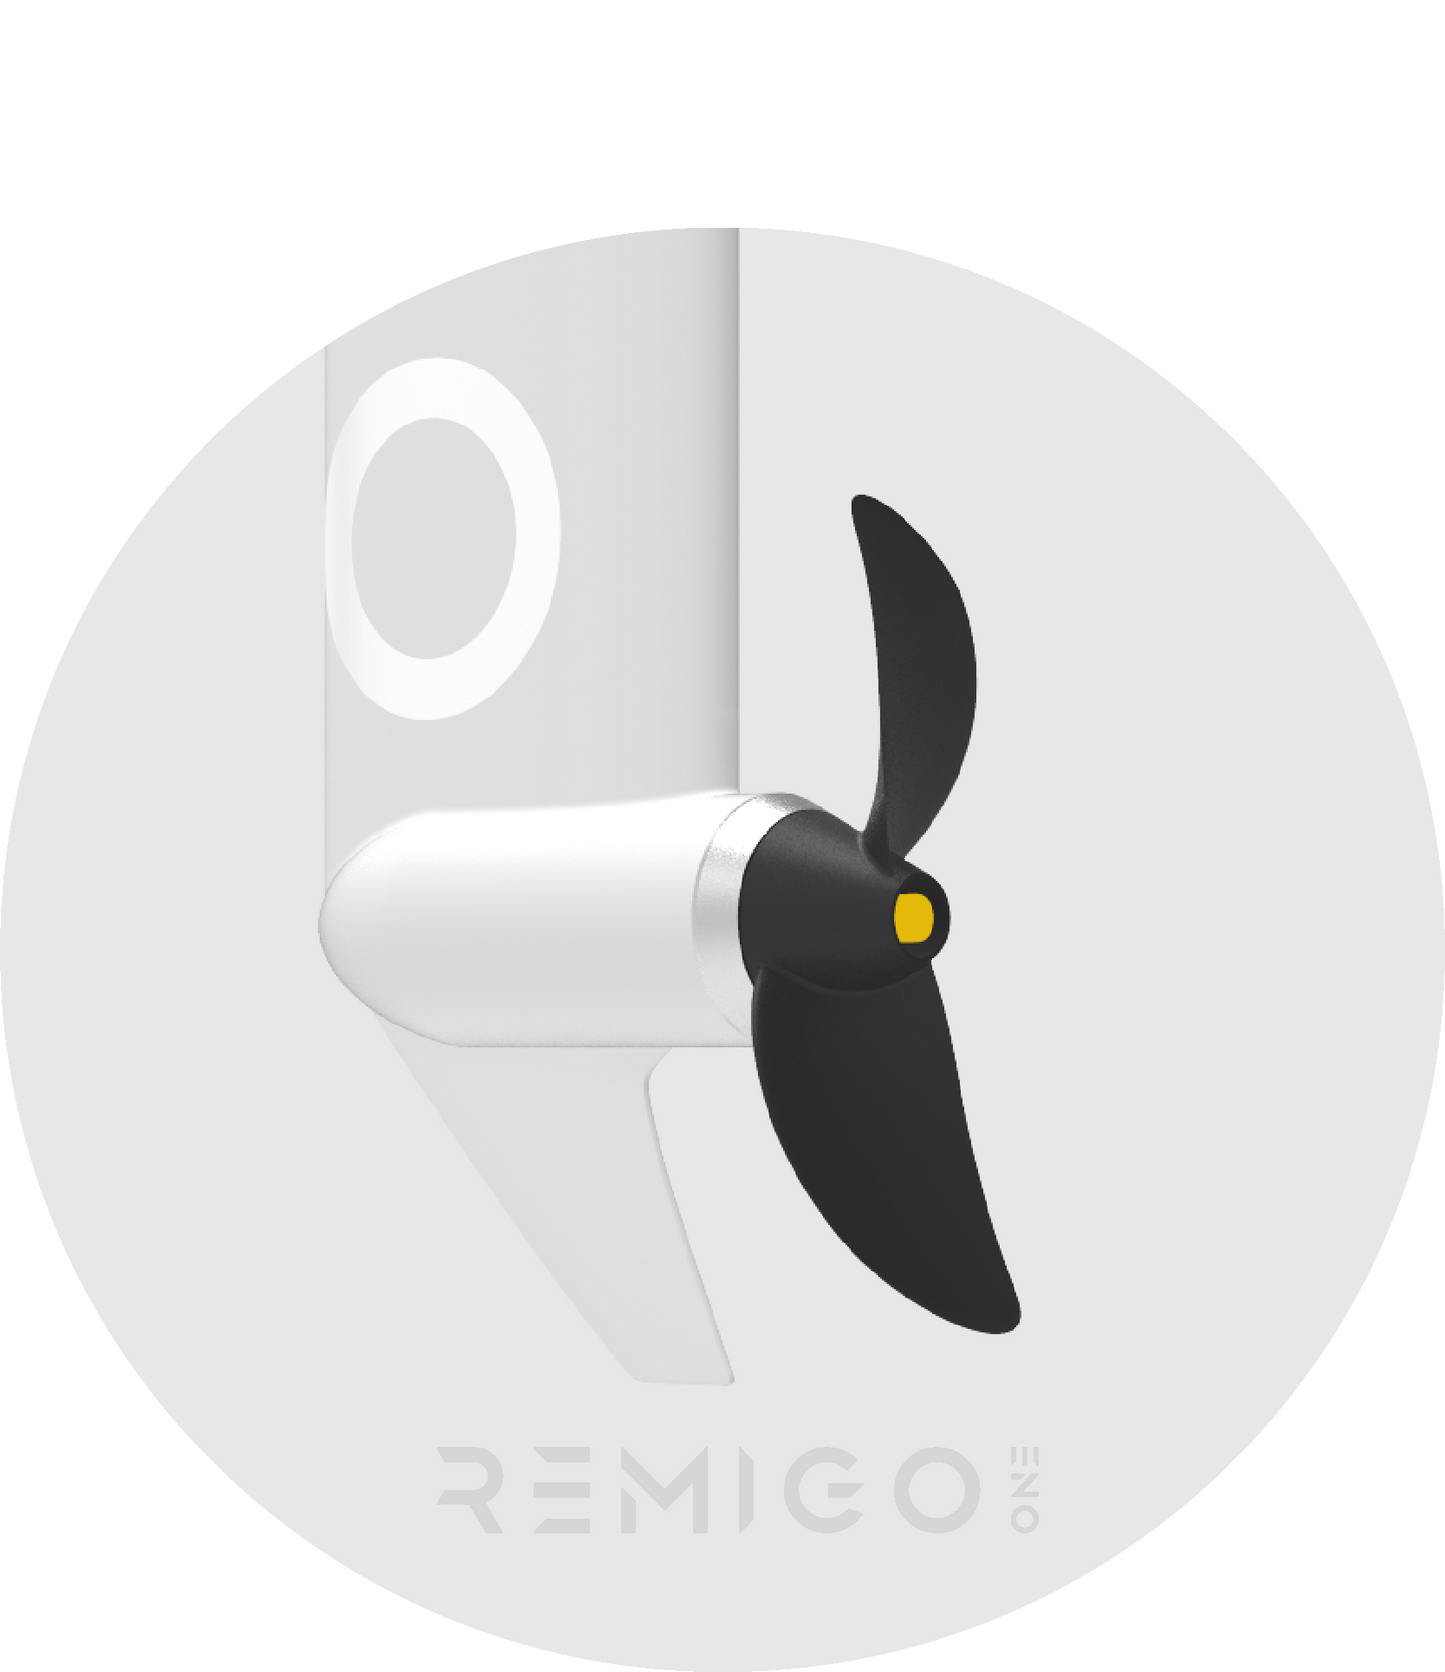 Spare propeller for RemigoOne